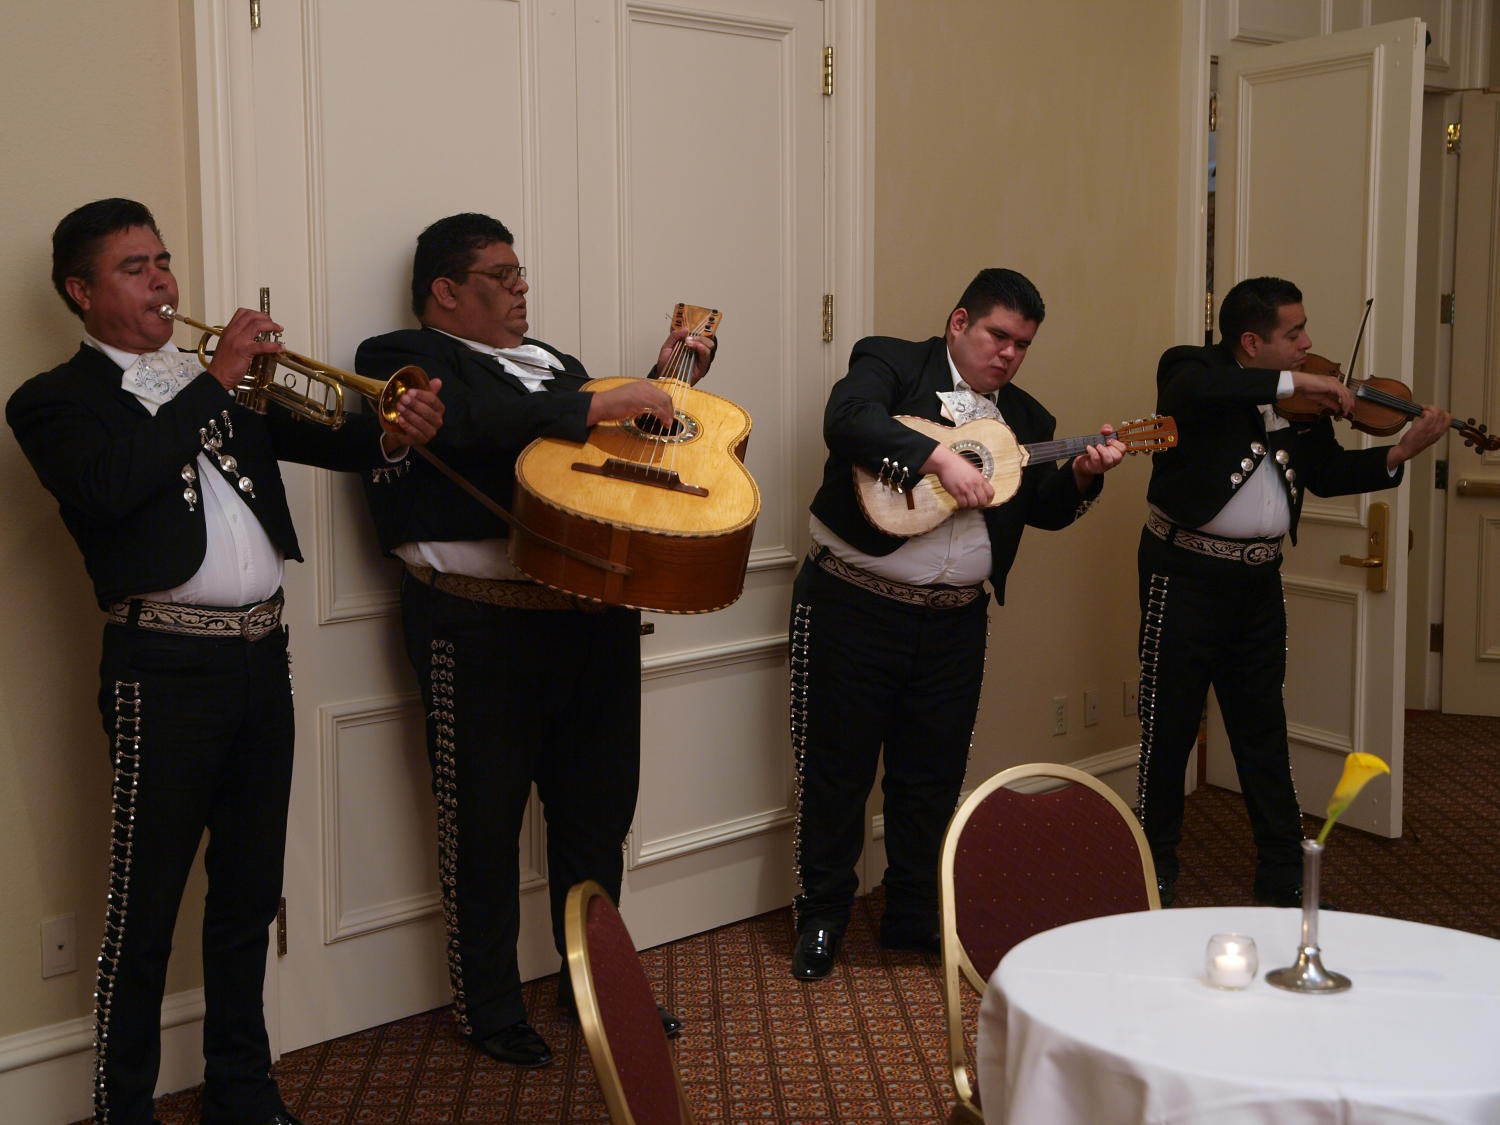 [Mariachi band performing at the TDNA dinner], Photograph of a local mariachi band performing for the guests at the 2008 Texas Daily Newspaper Association annual conference awards dinner, held at The Westin Riverwalk Hotel in San Antonio, Texas., 